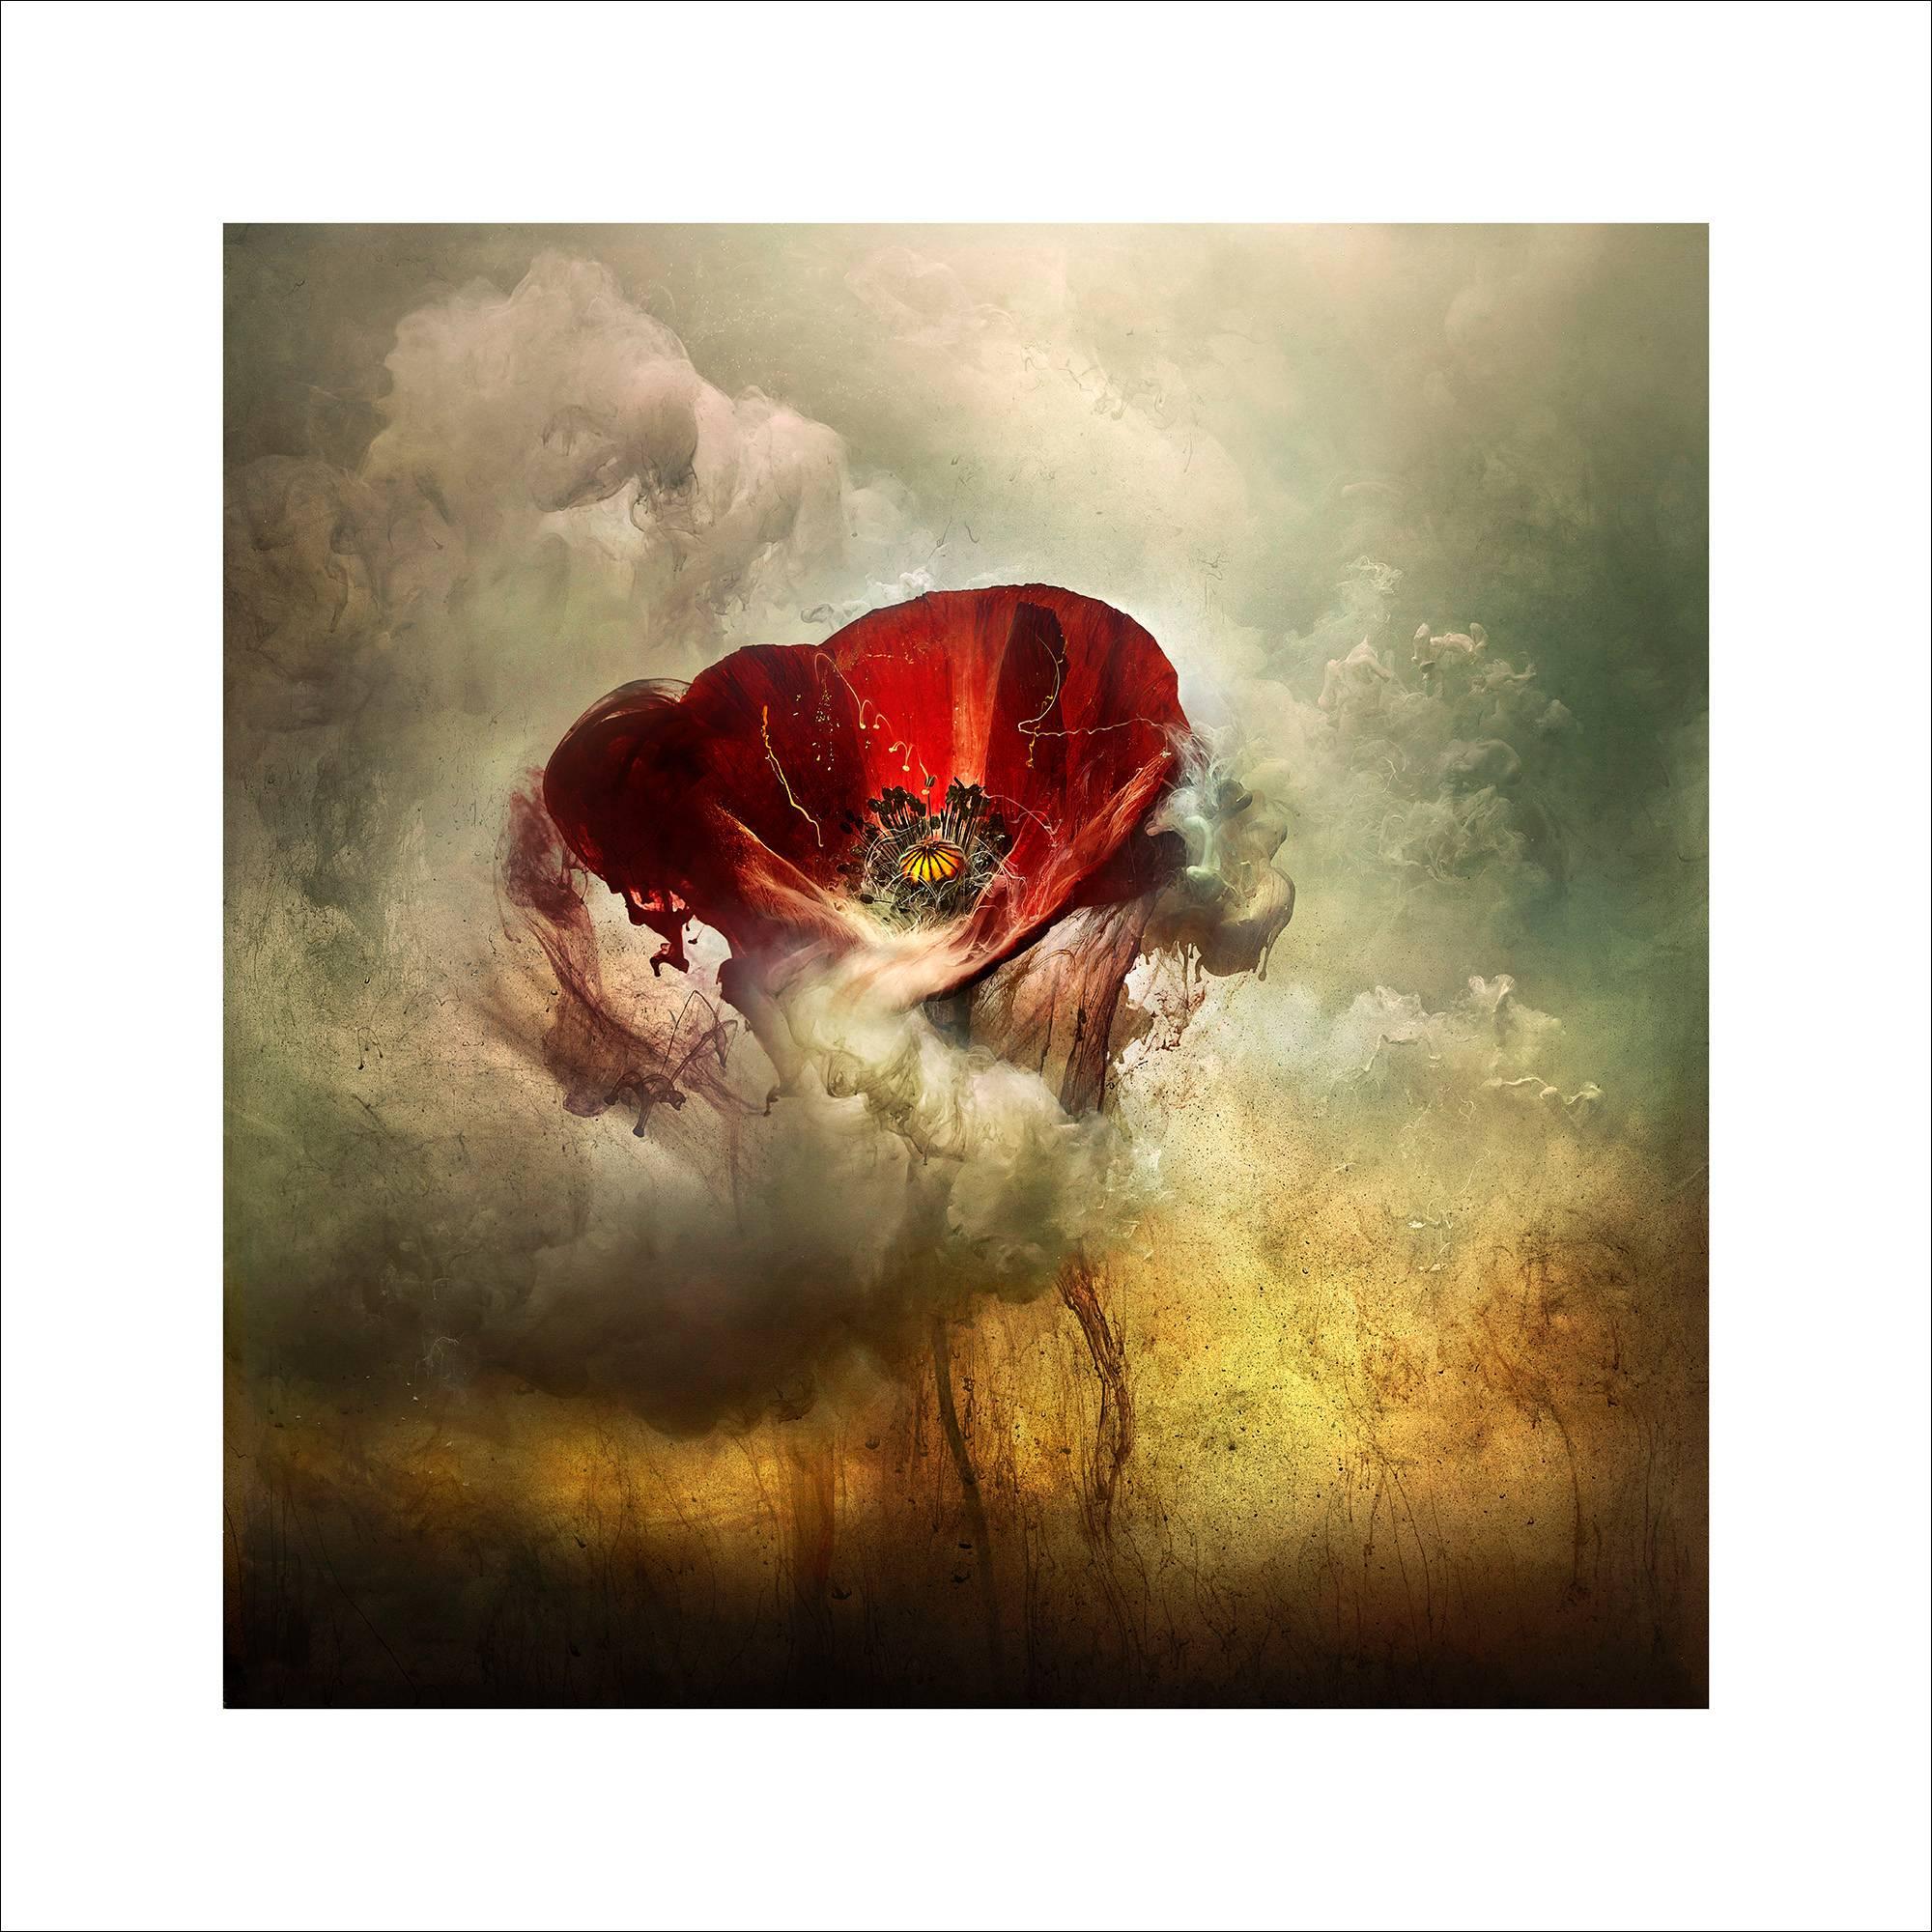 "War Poppy 3", 2015 Contemporary Photography by Giles Revell For Sale